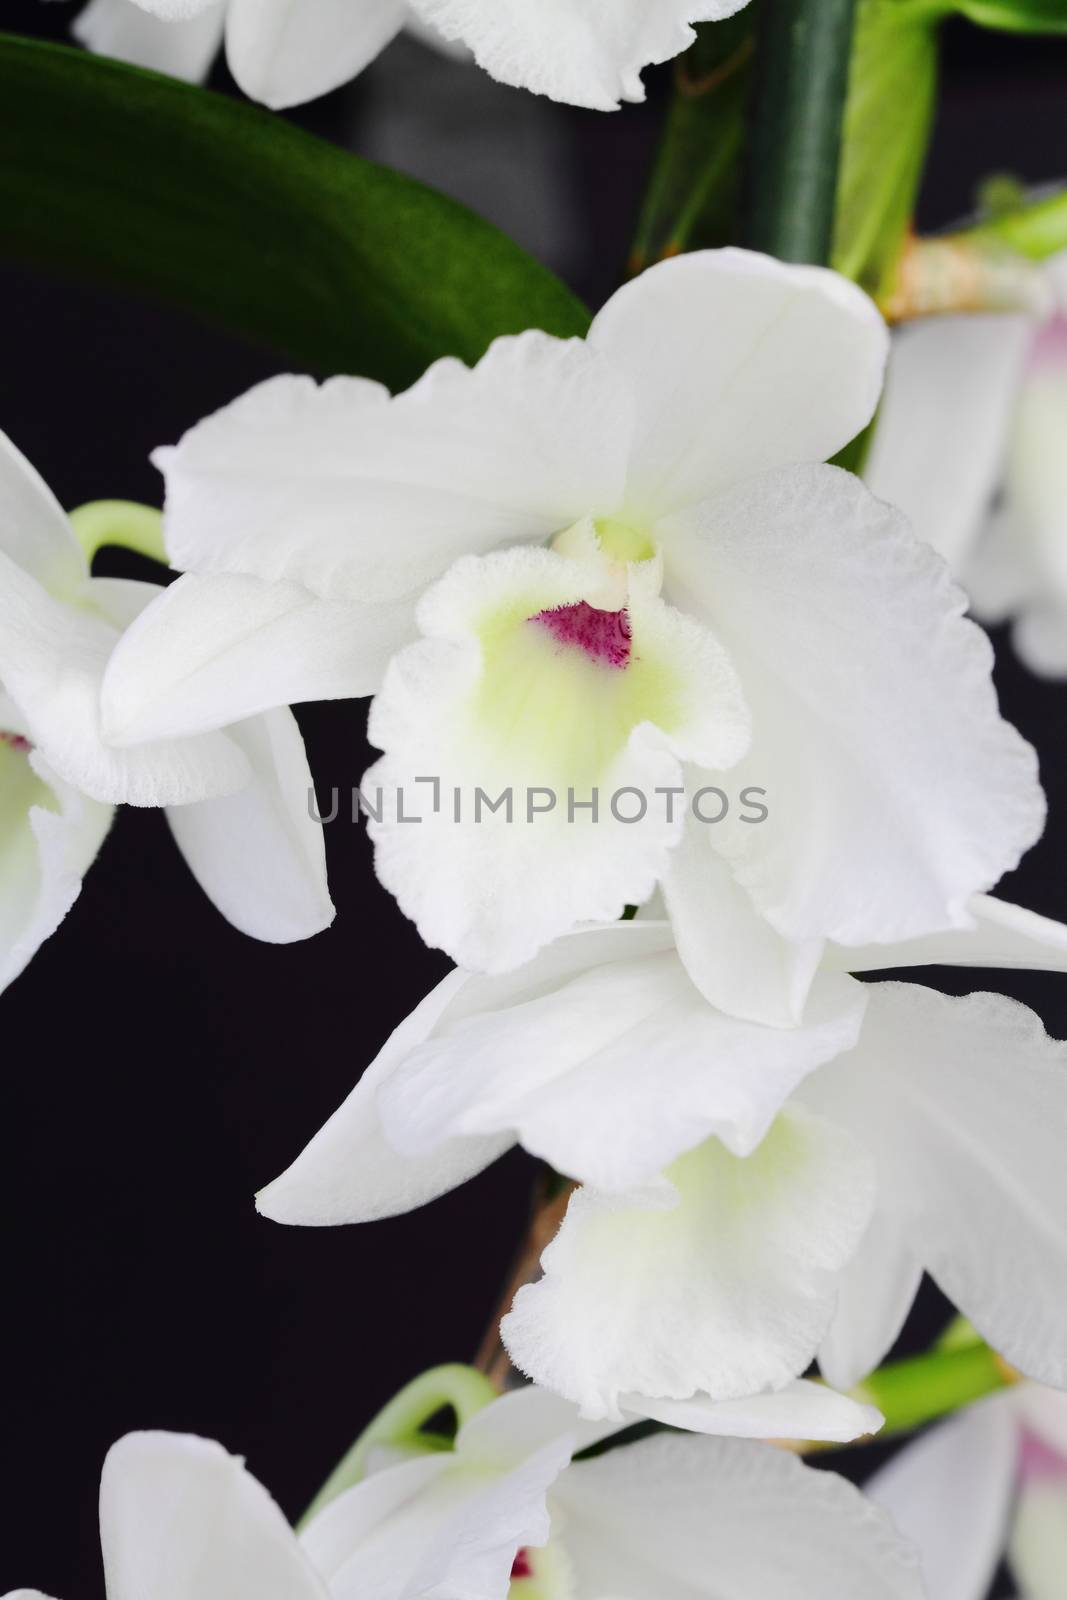 Dendrobium orchid by mitzy